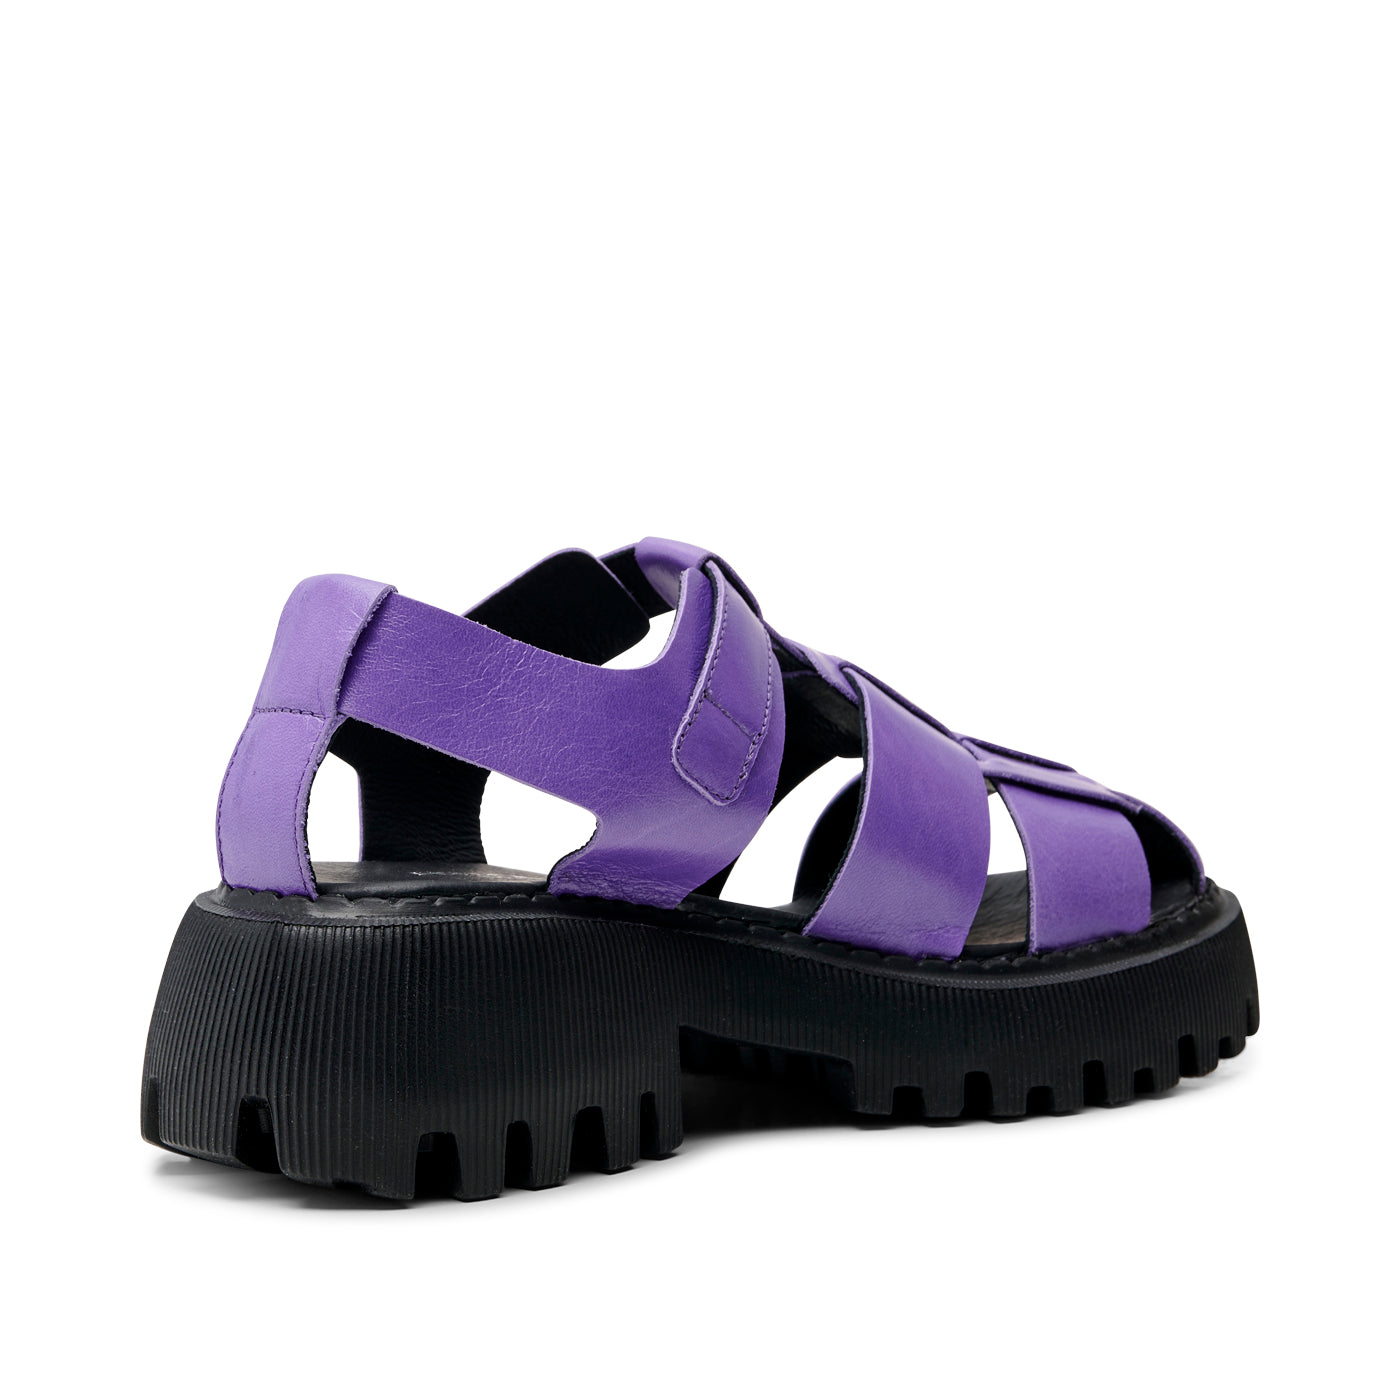 SHOE THE BEAR WOMENS Posey sandal shiny leather Sandals 915 VIOLET